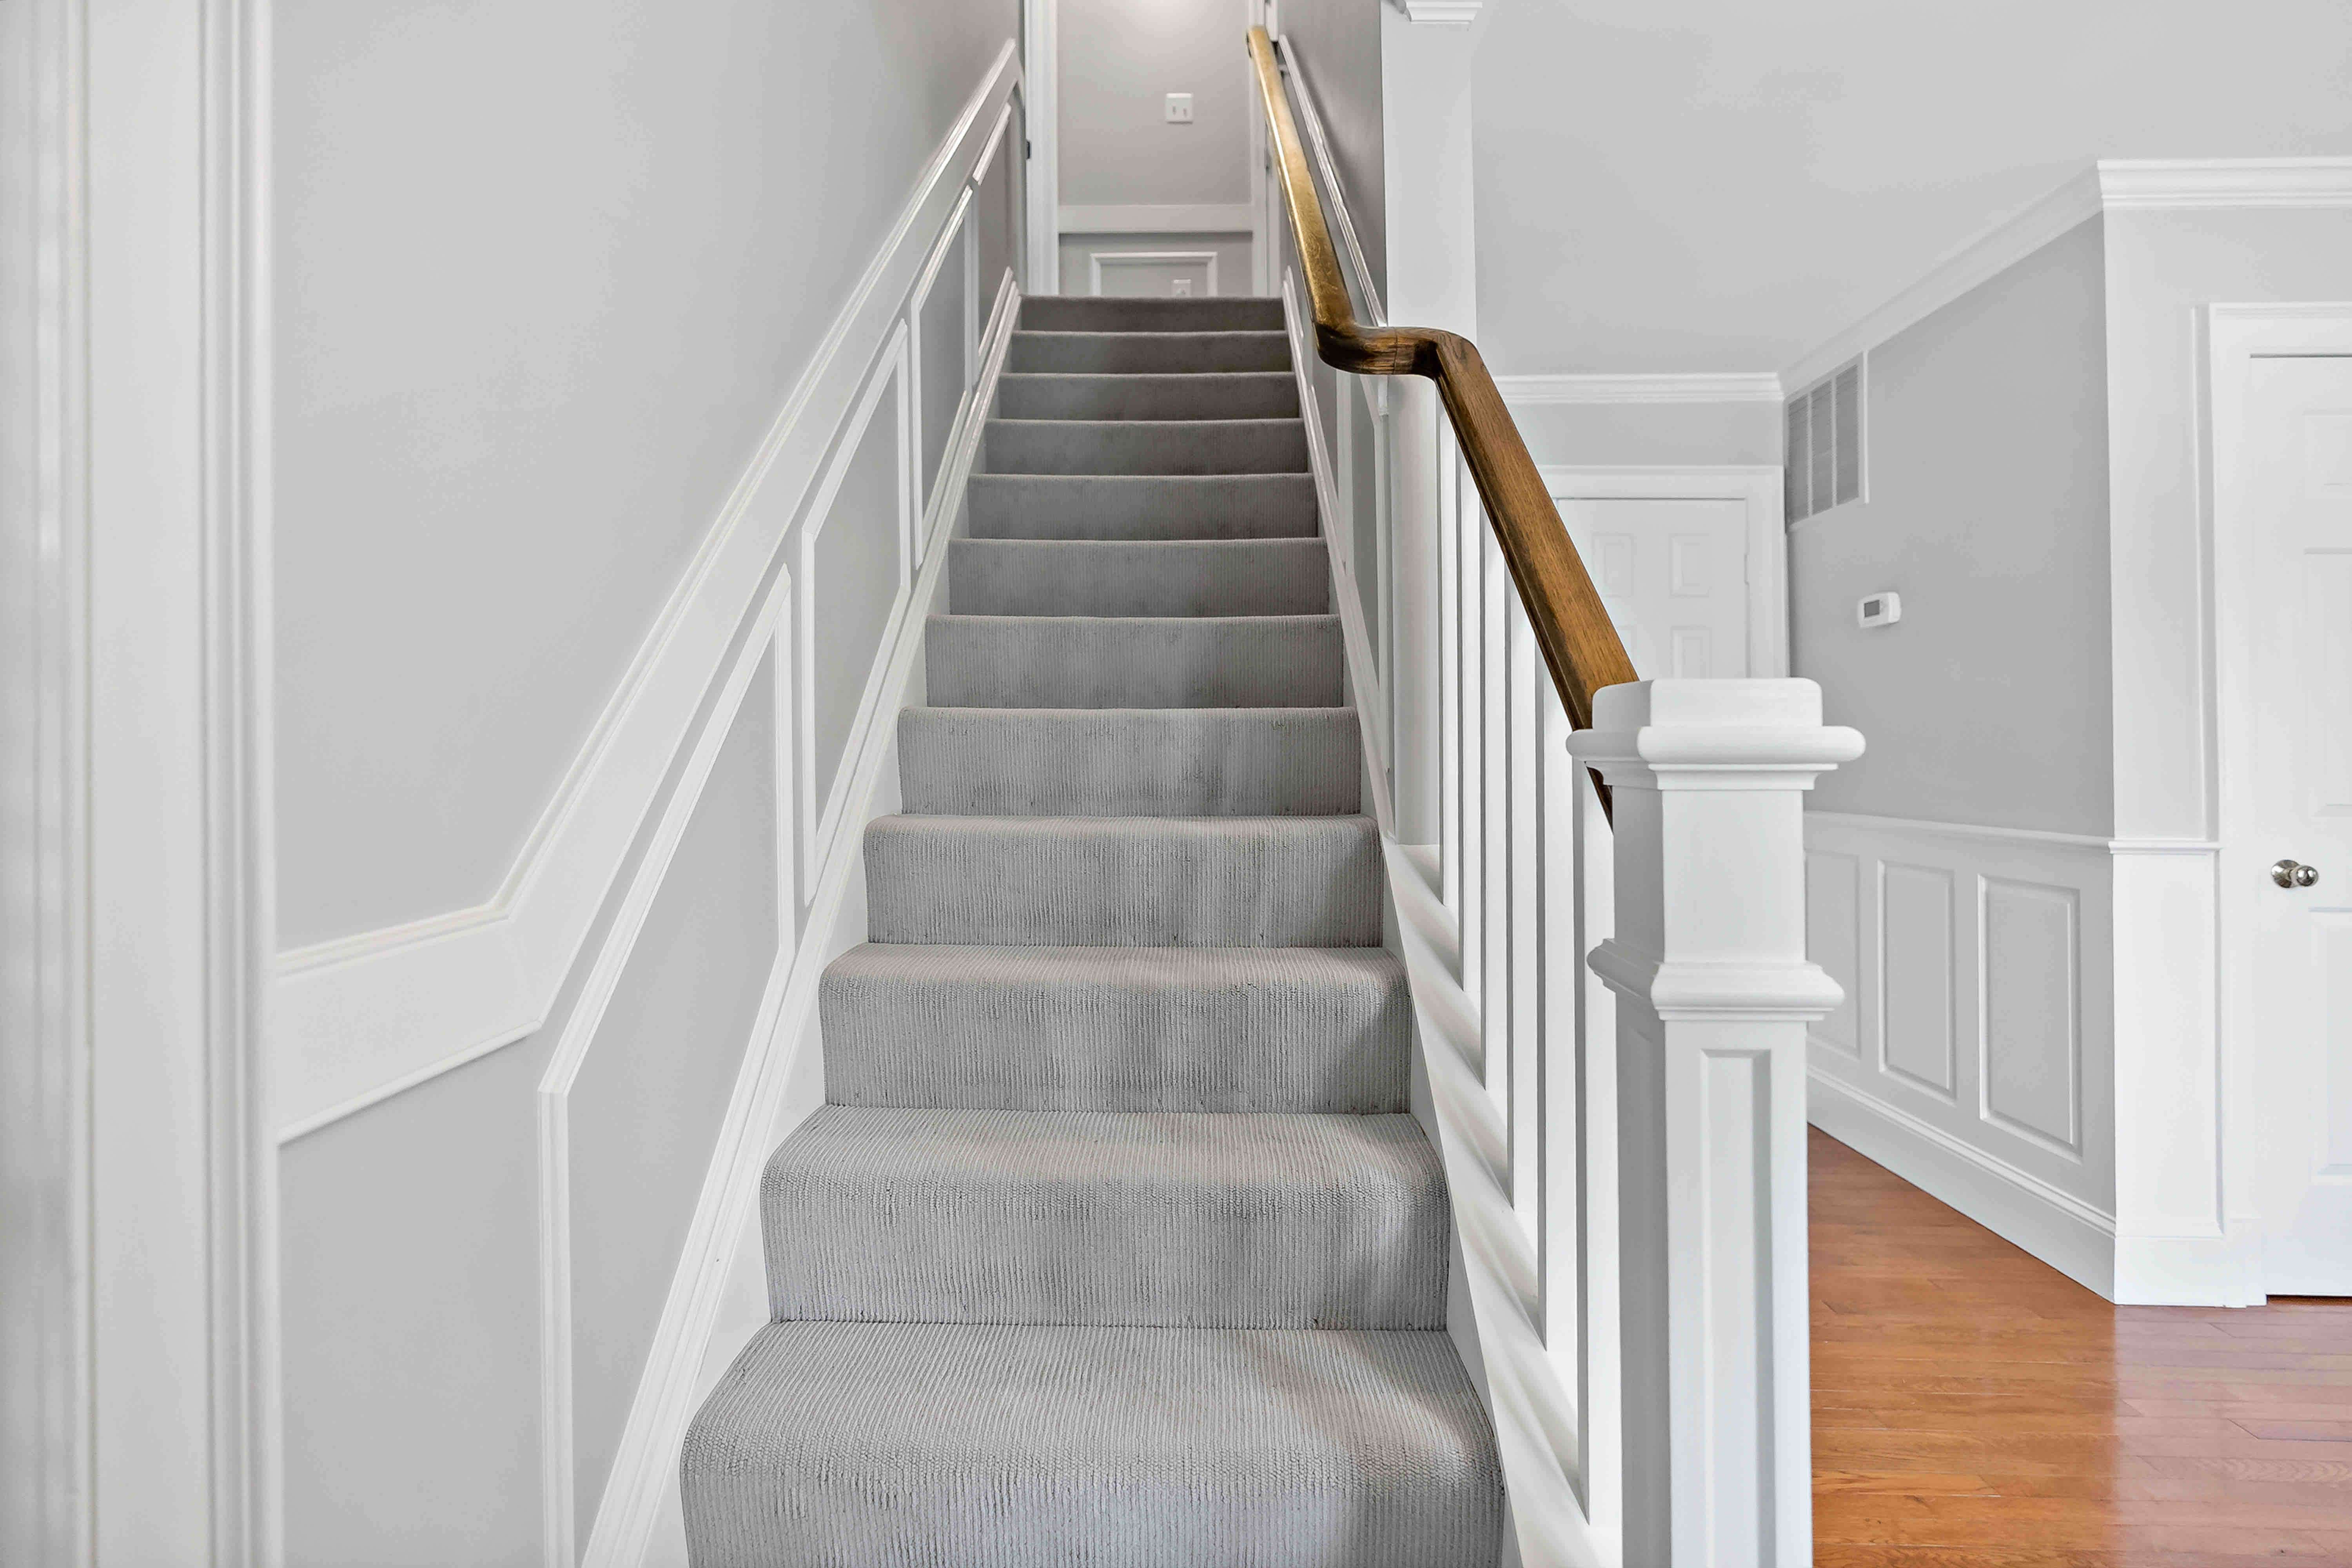 White and brown railing on staircase